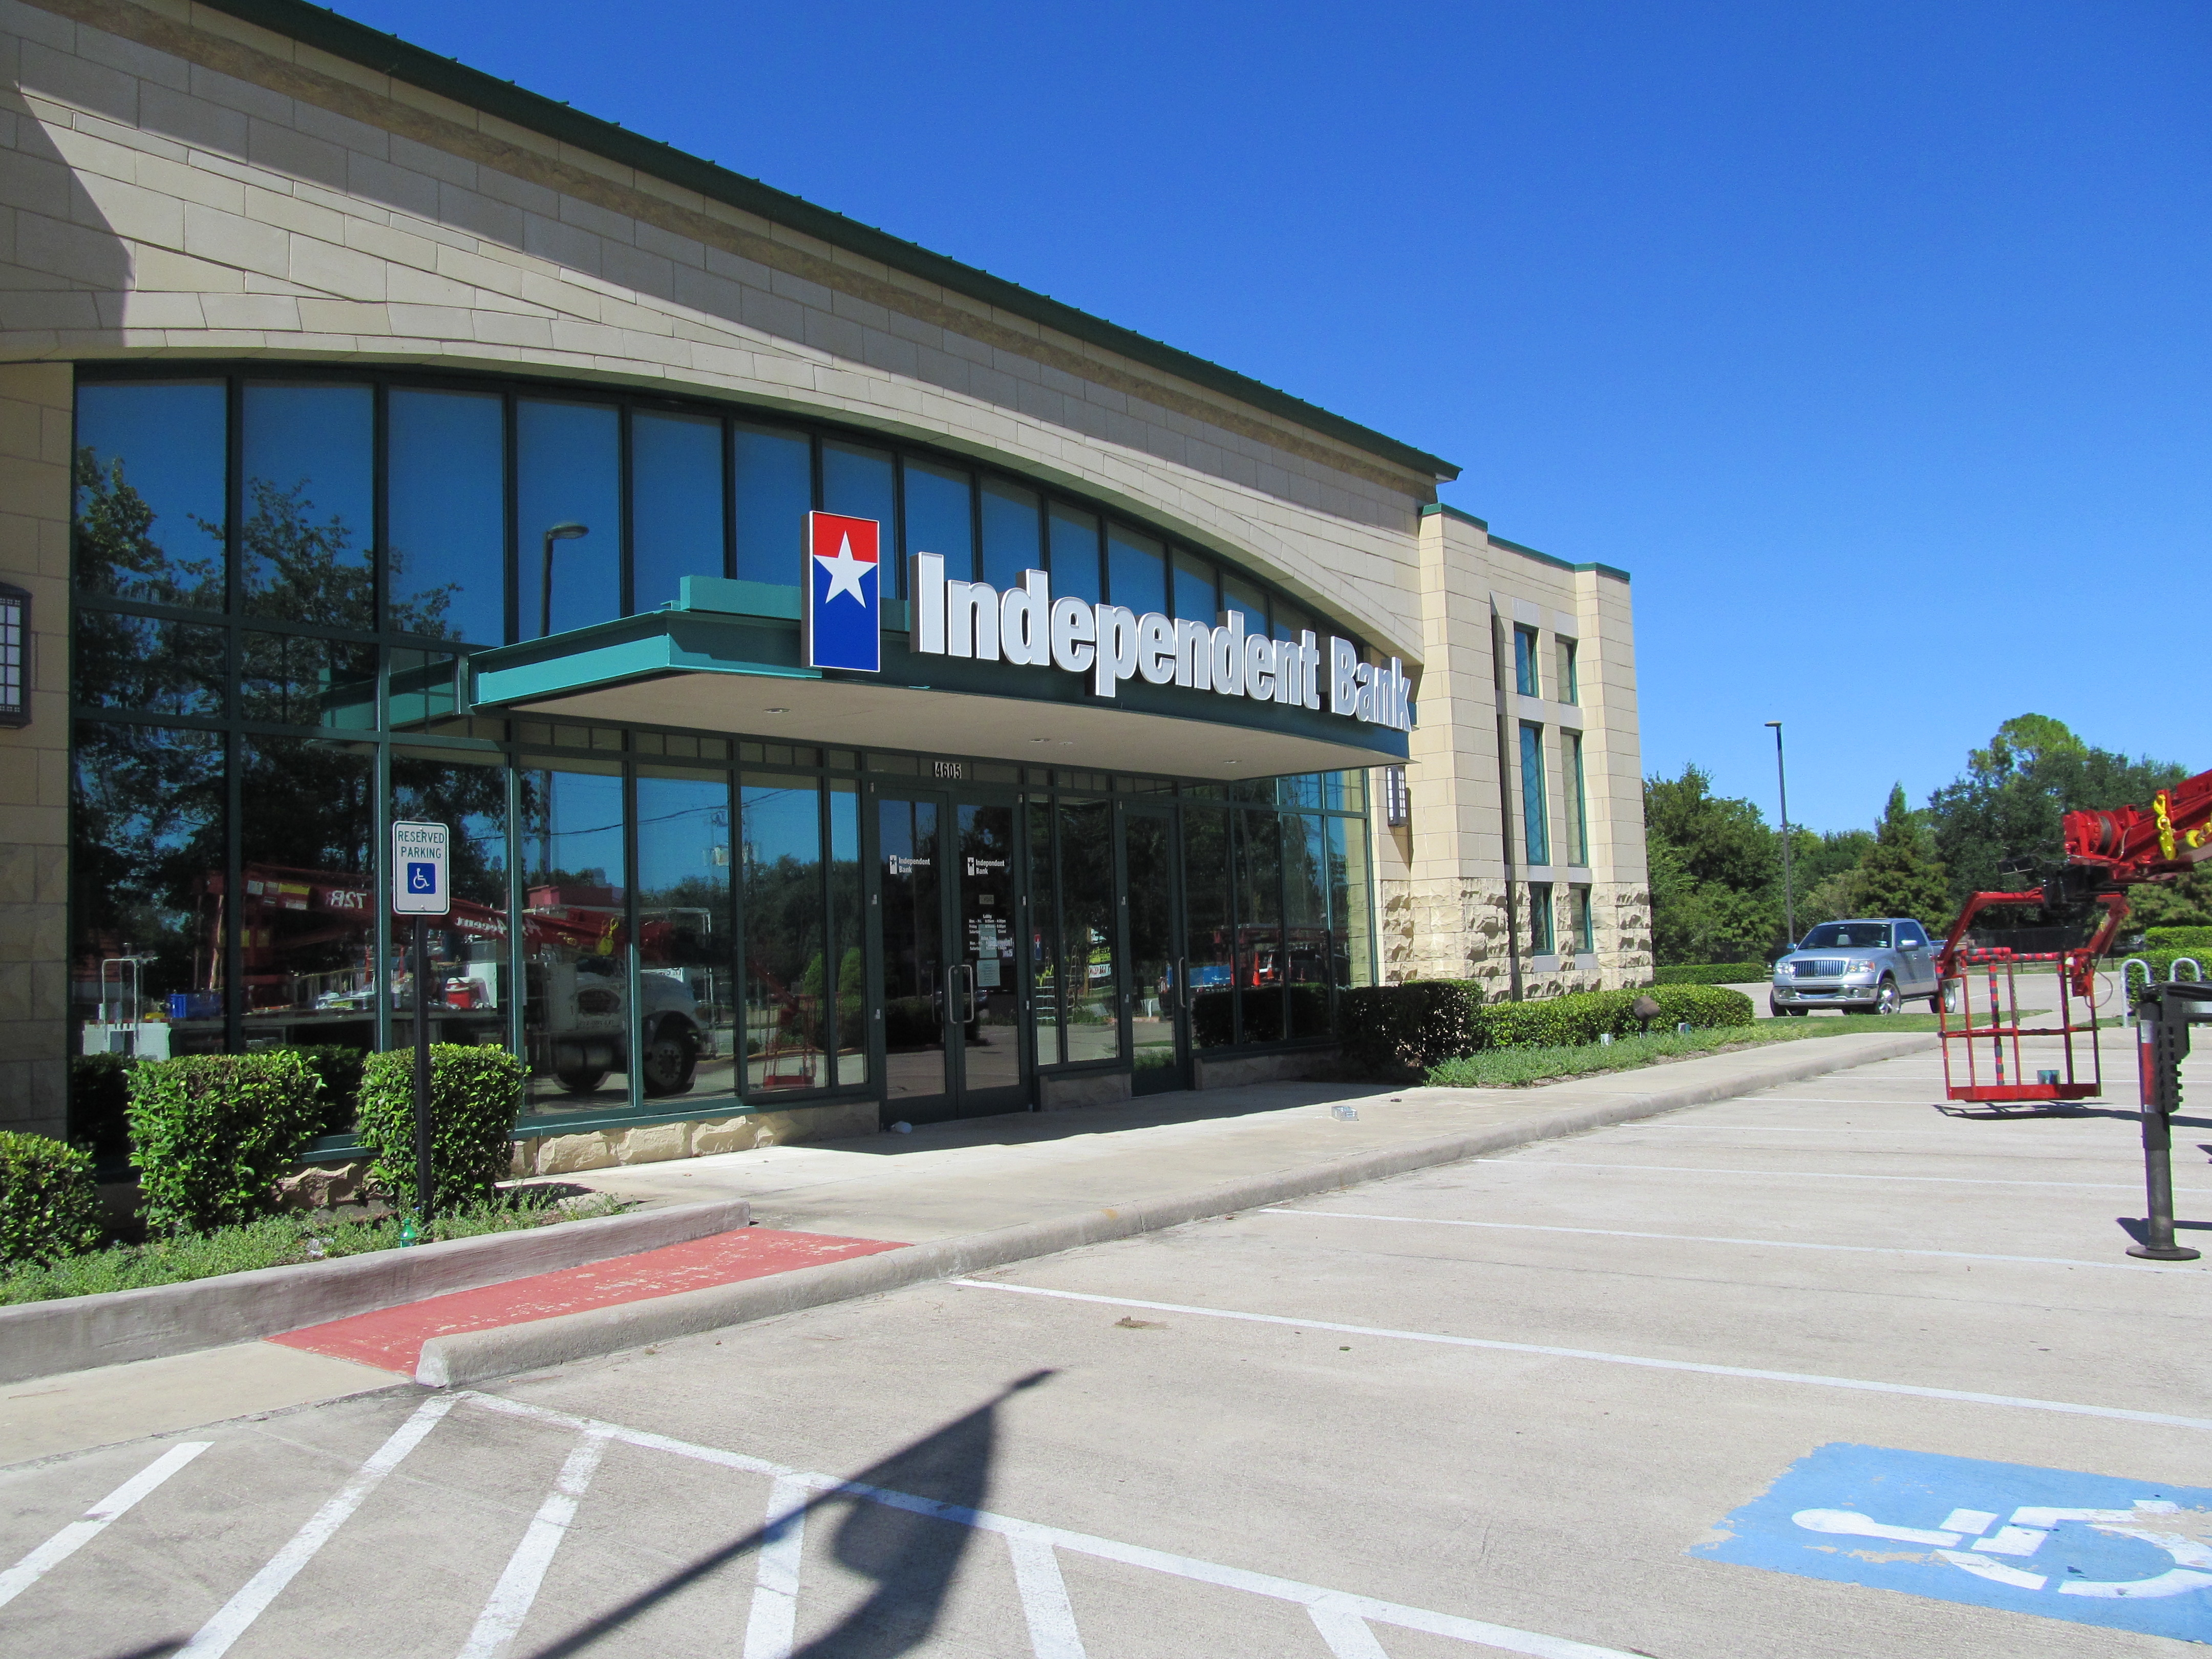 Independent Bank is now Independent Financial Photo